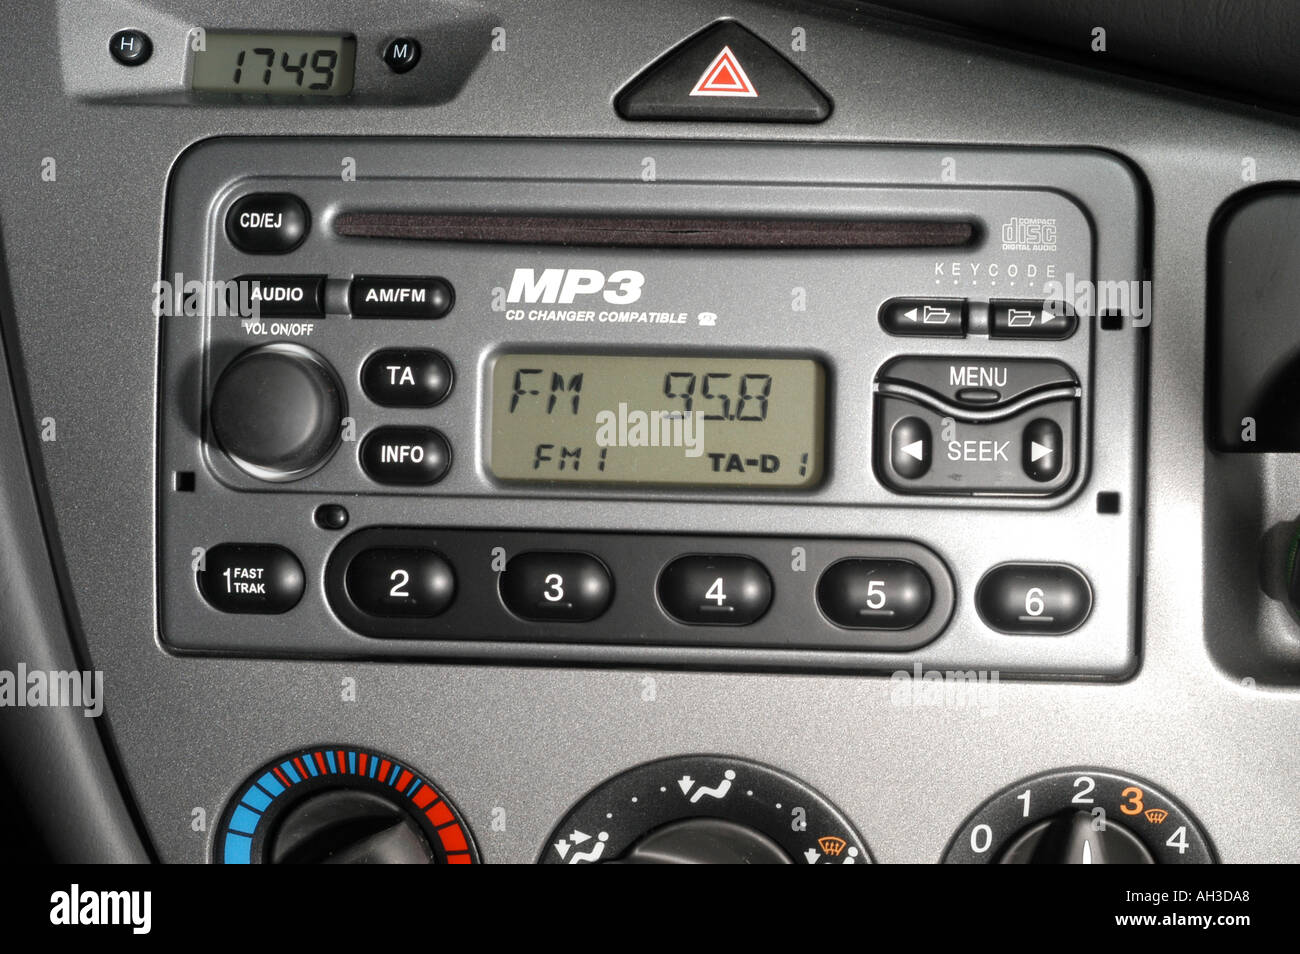 Ford Focus Radio and MP3 Player Stock Photo - Alamy